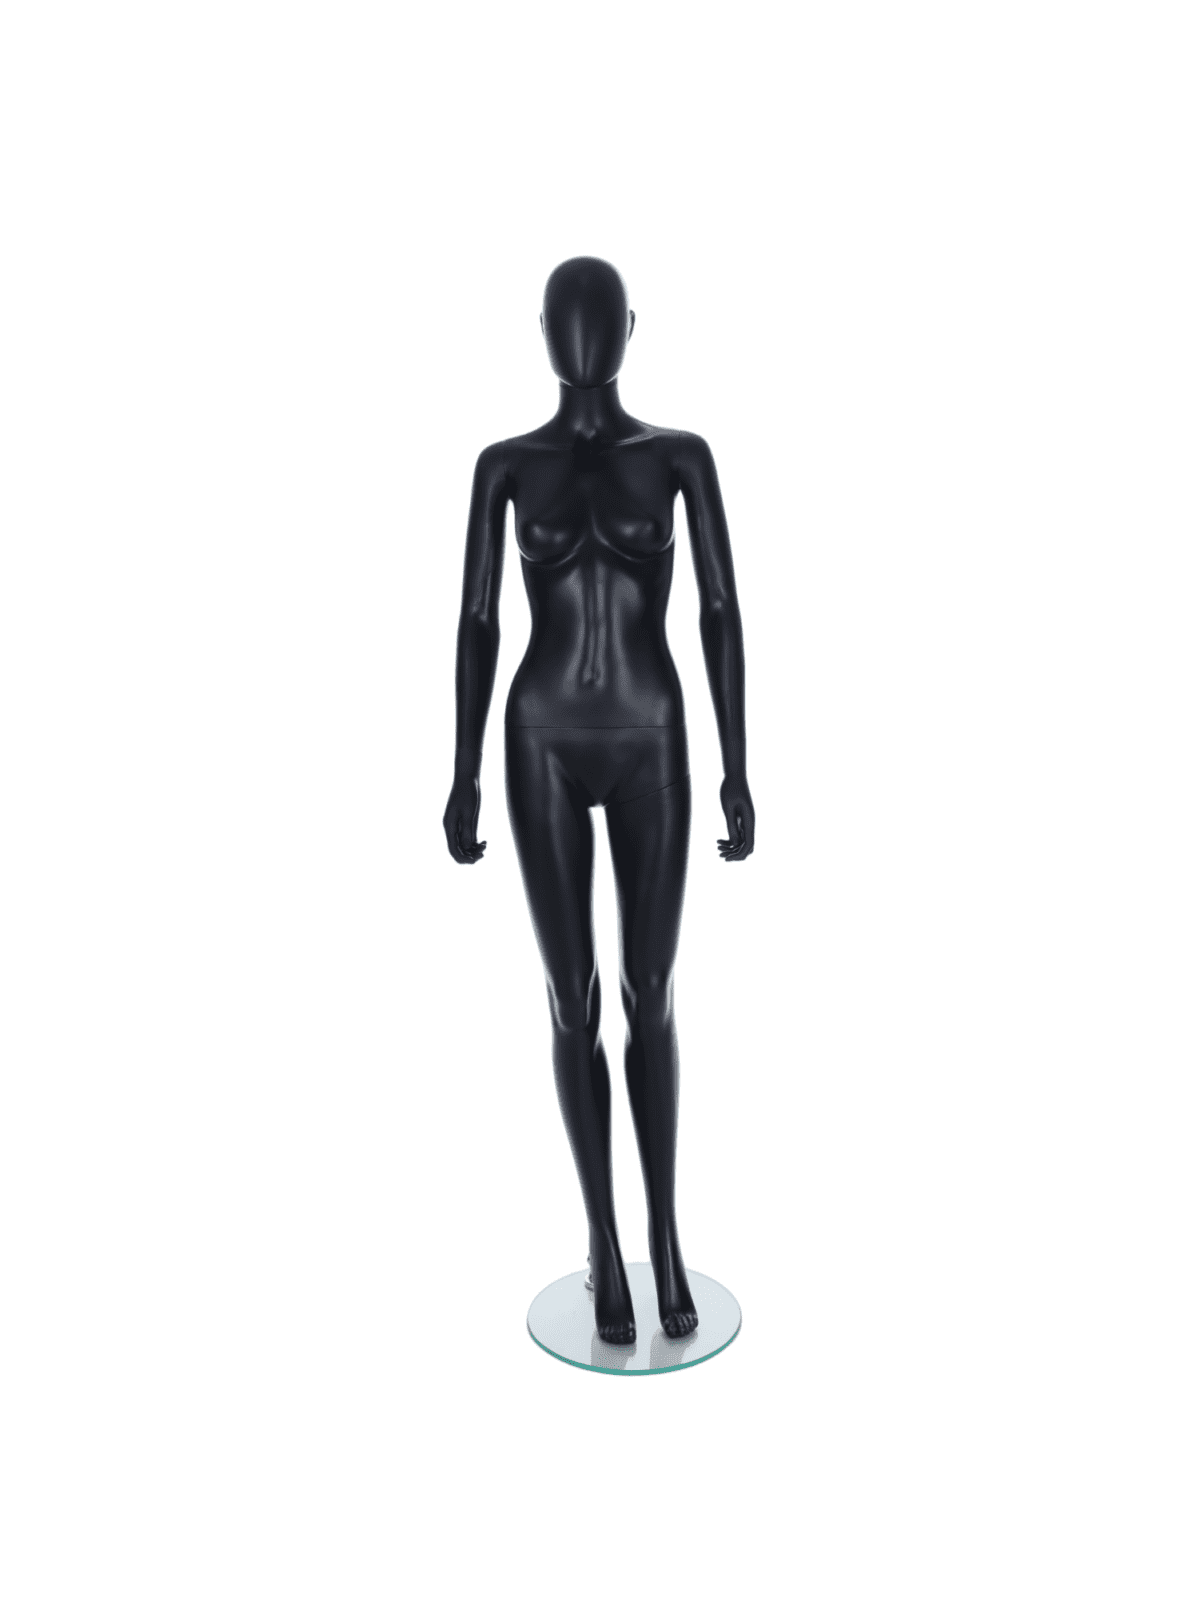 Black Female Mannequin with ears